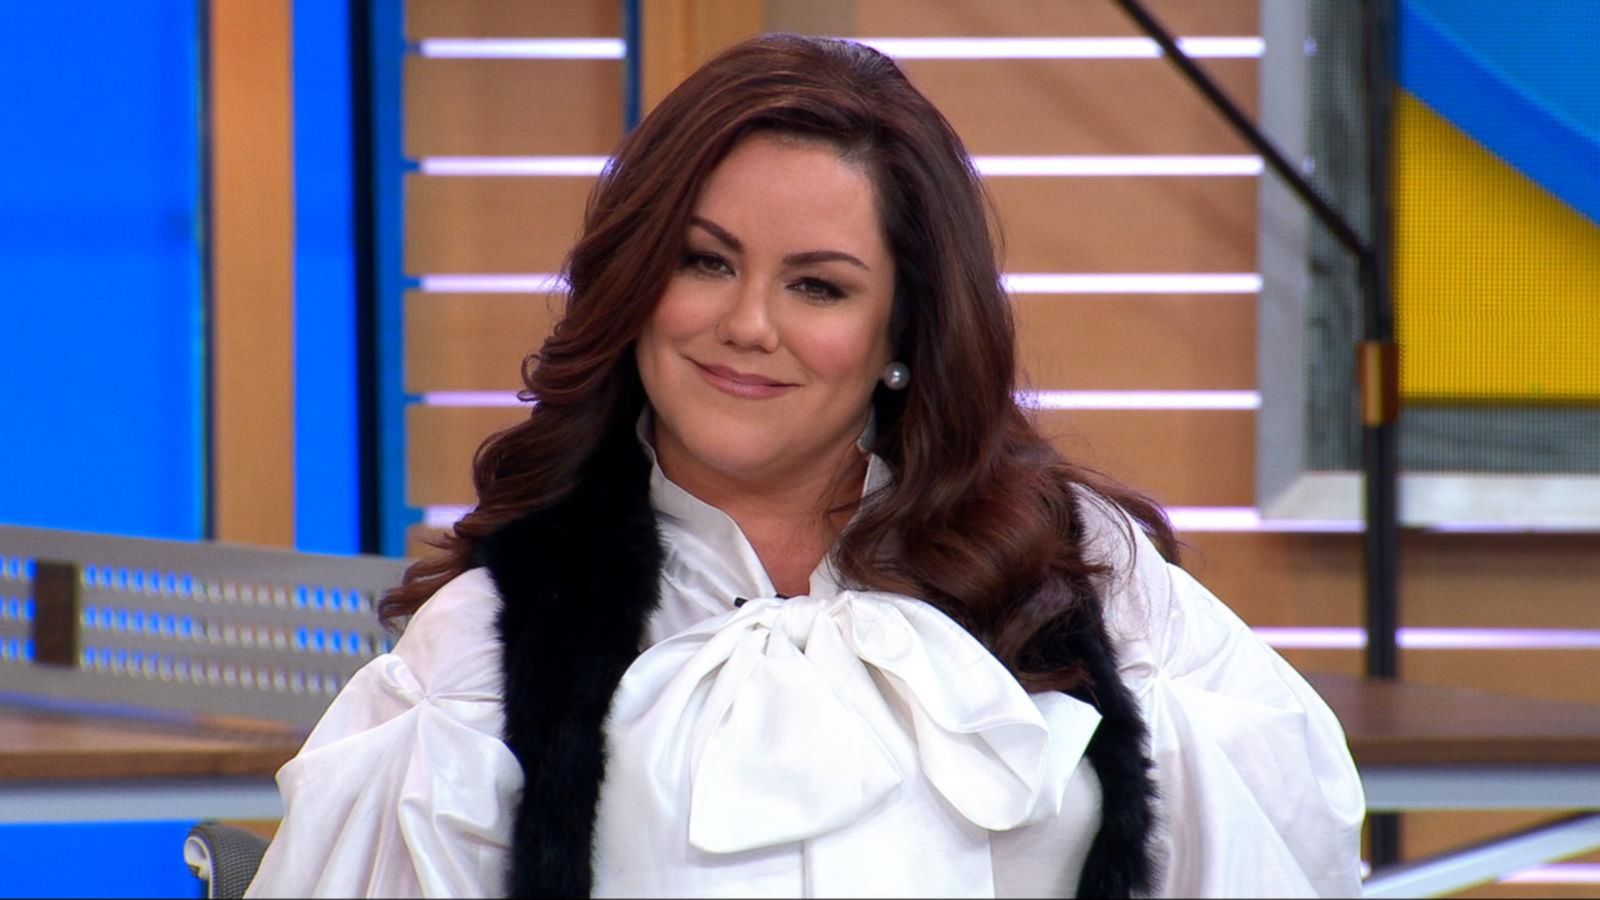 Hilarious American Housewife Star Katy Mixon Tells Us About Her Funny